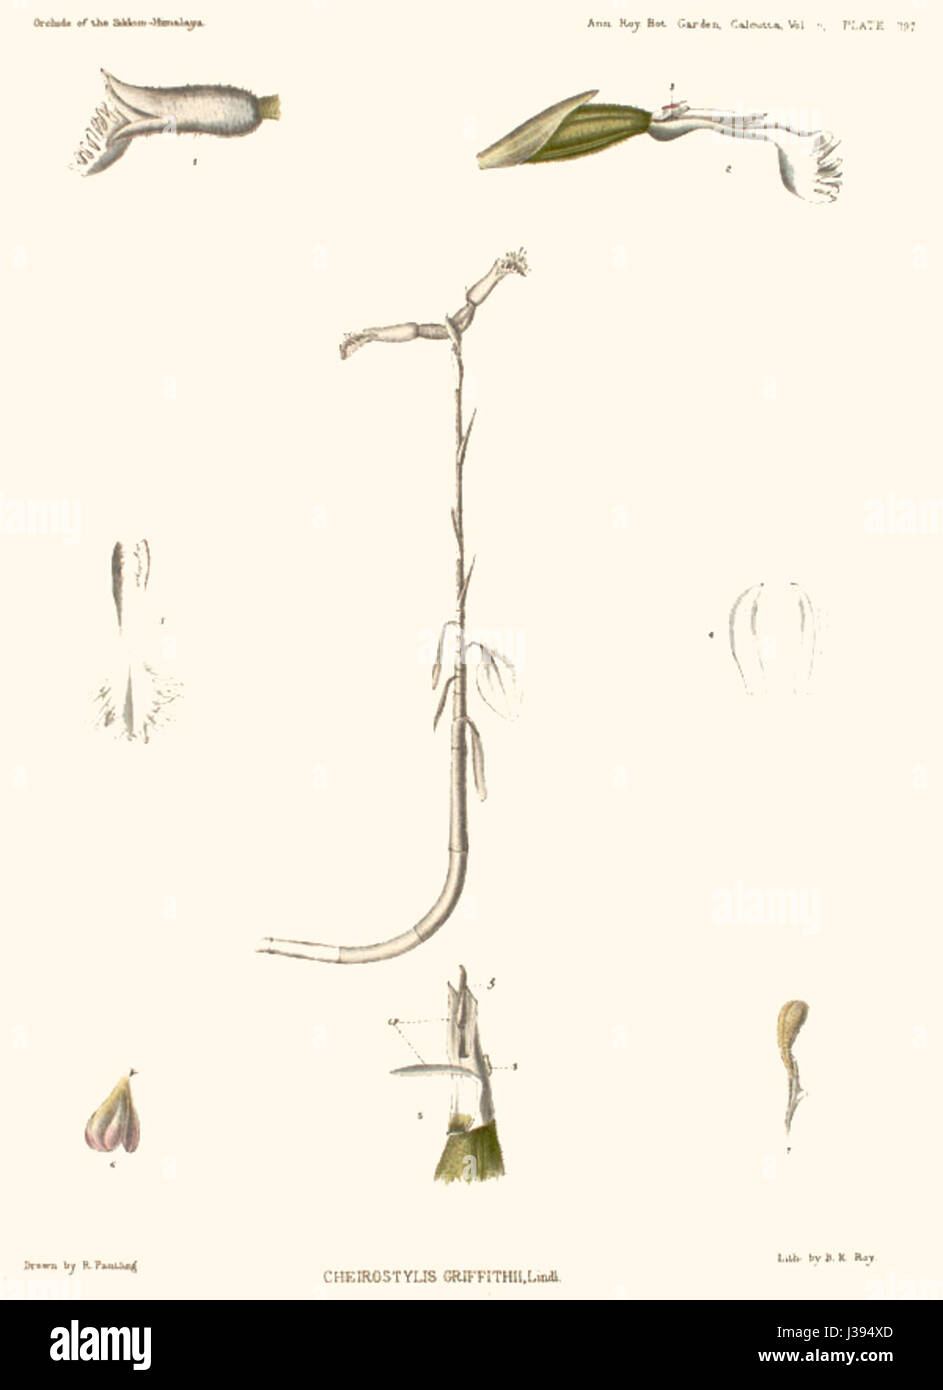 Cheirostylis griffithii   The Orchids of the Sikkim Himalaya pl 397 (1889)   contrast Stock Photo